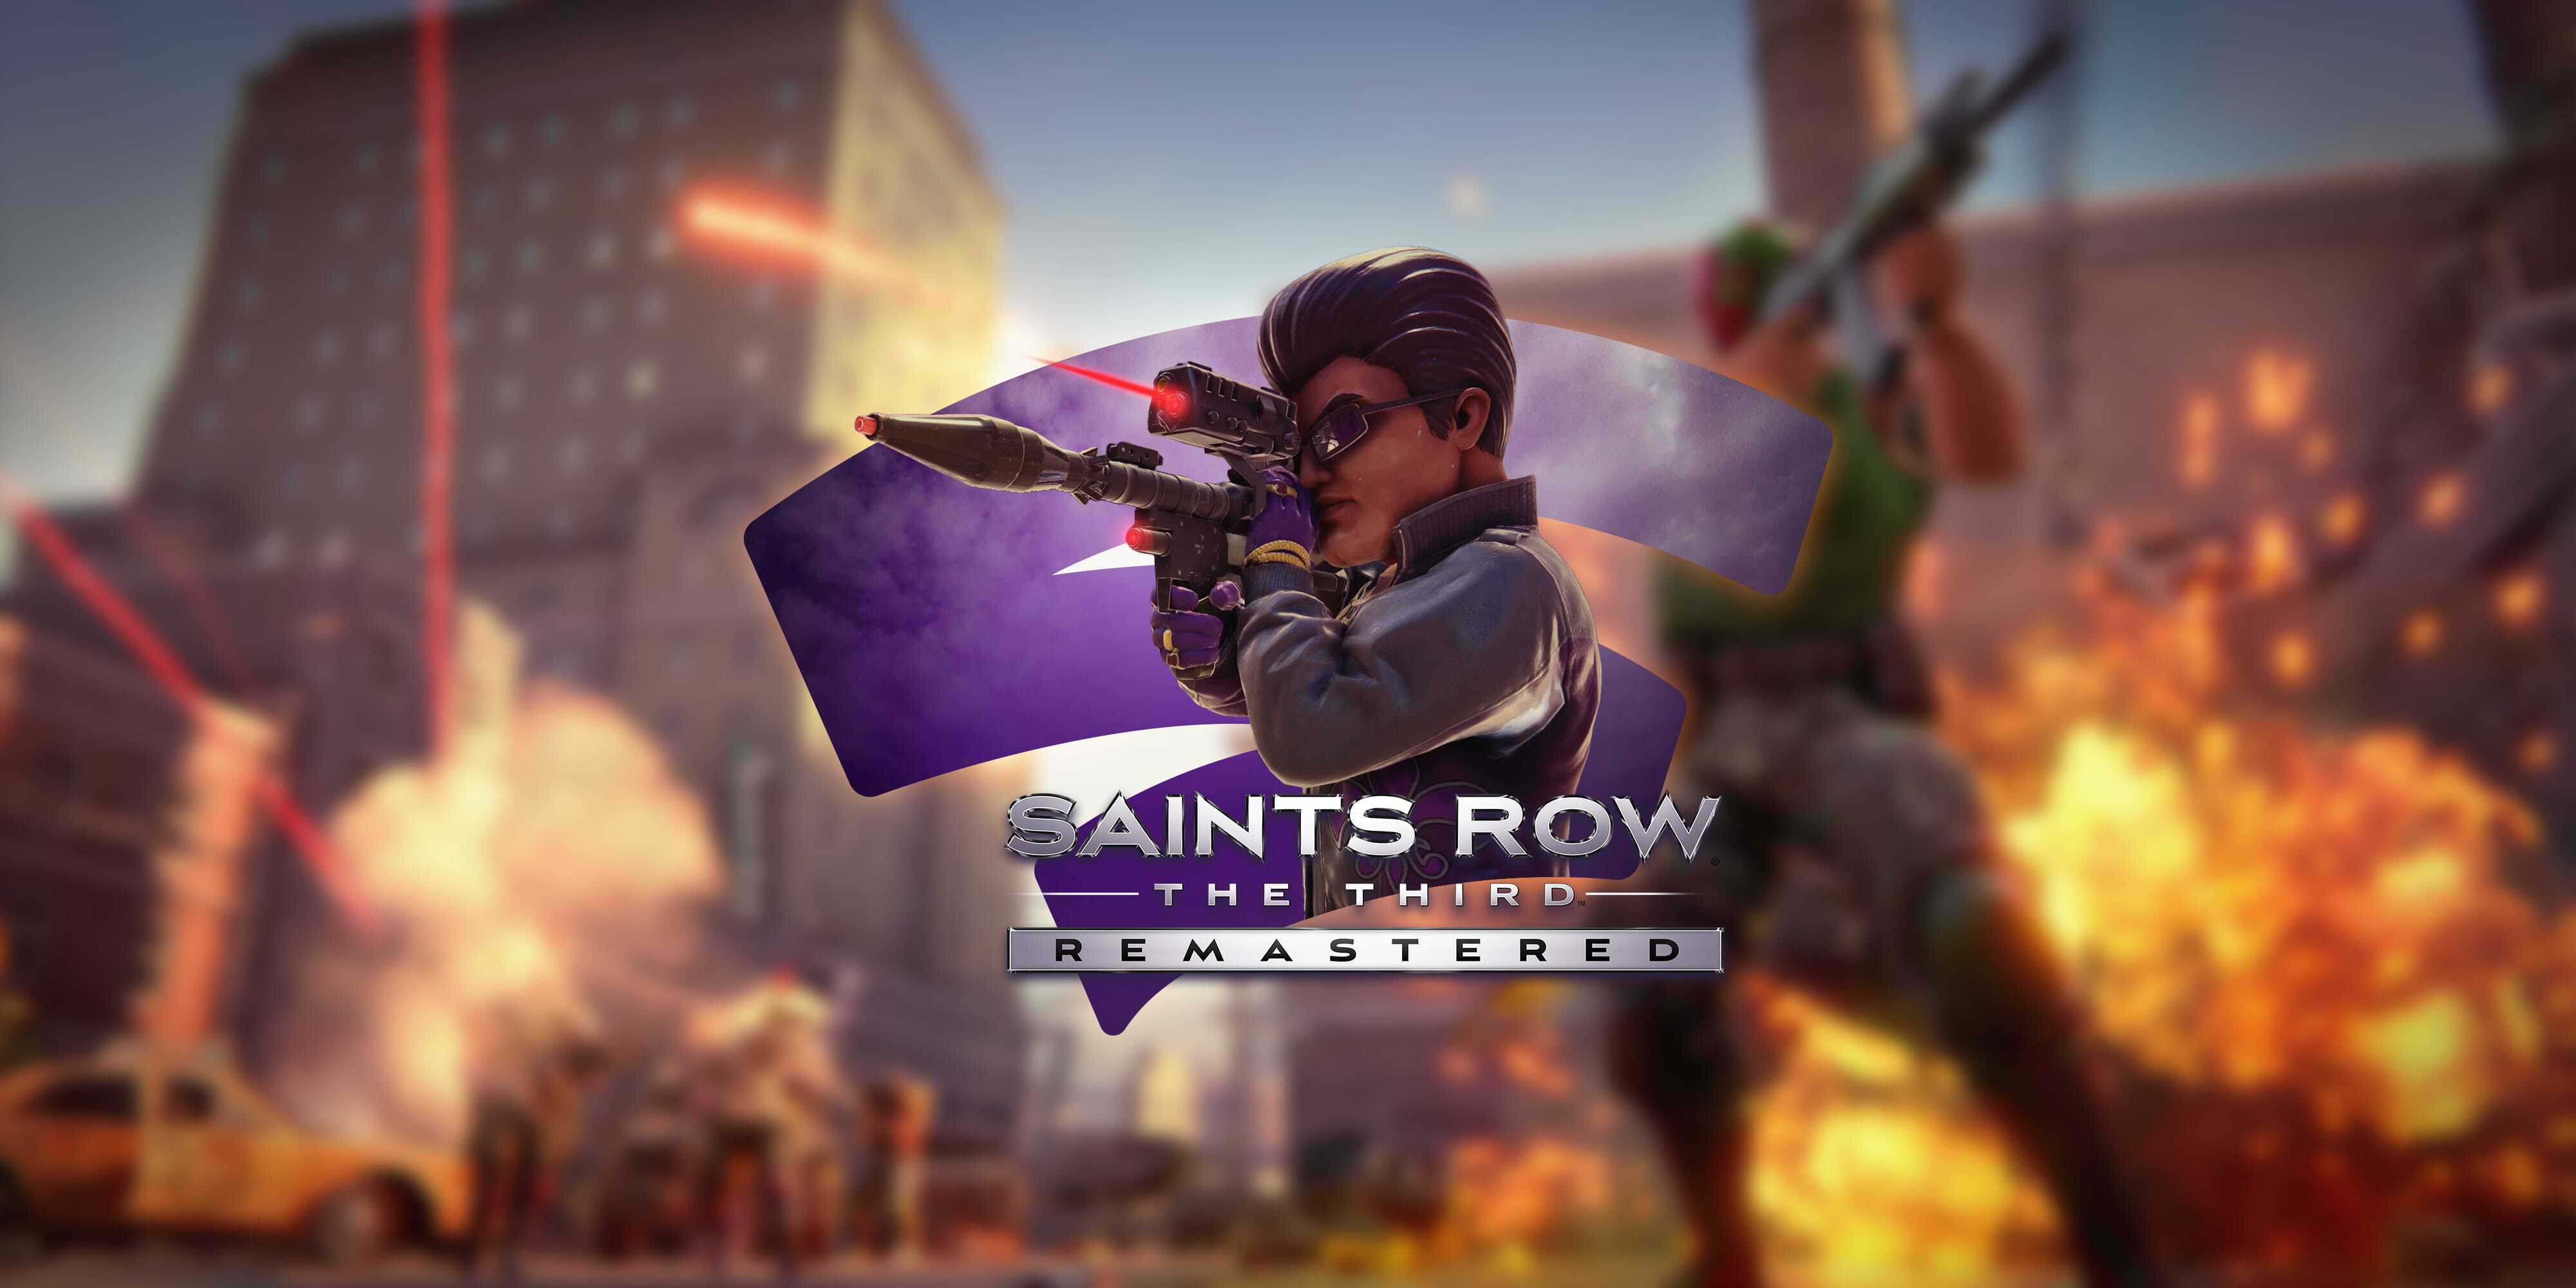 Review: Saints Row: the Third - Remastered @ Highland Arrow